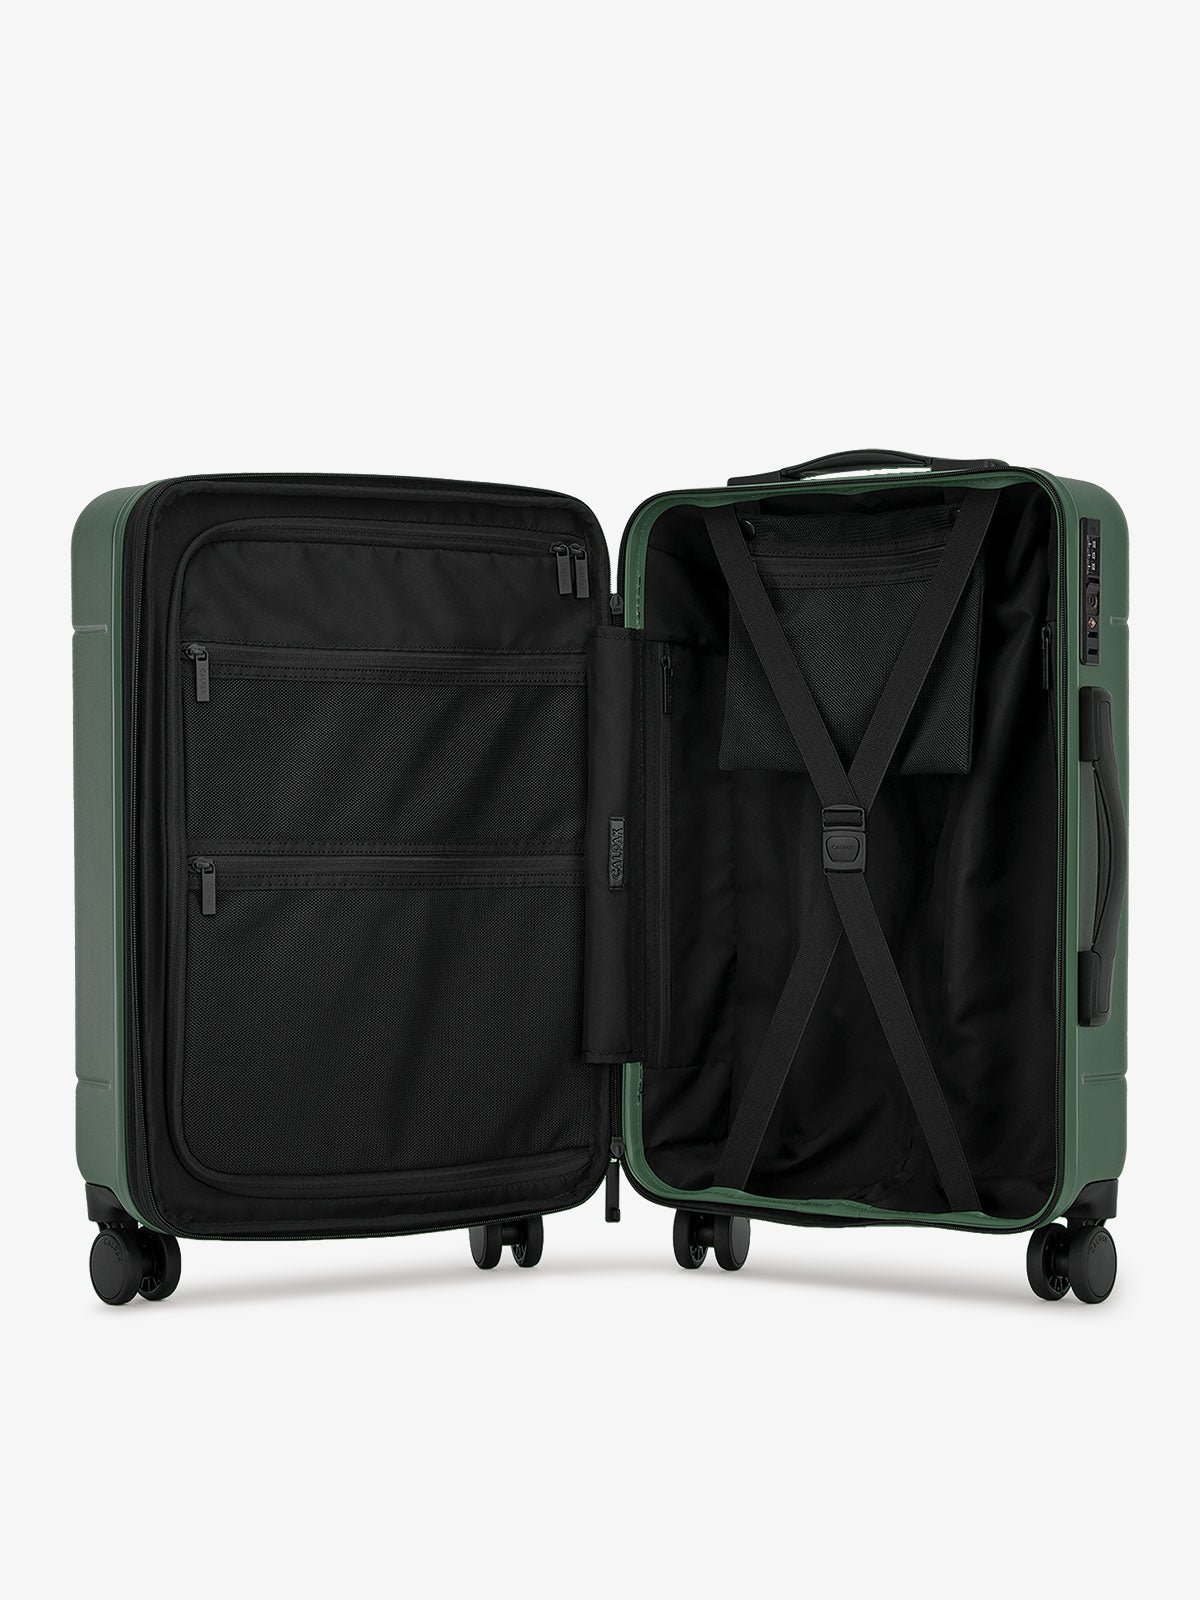 Emerald green CALPAK Hue hardside carry on suitcase with laptop compartment and compression straps